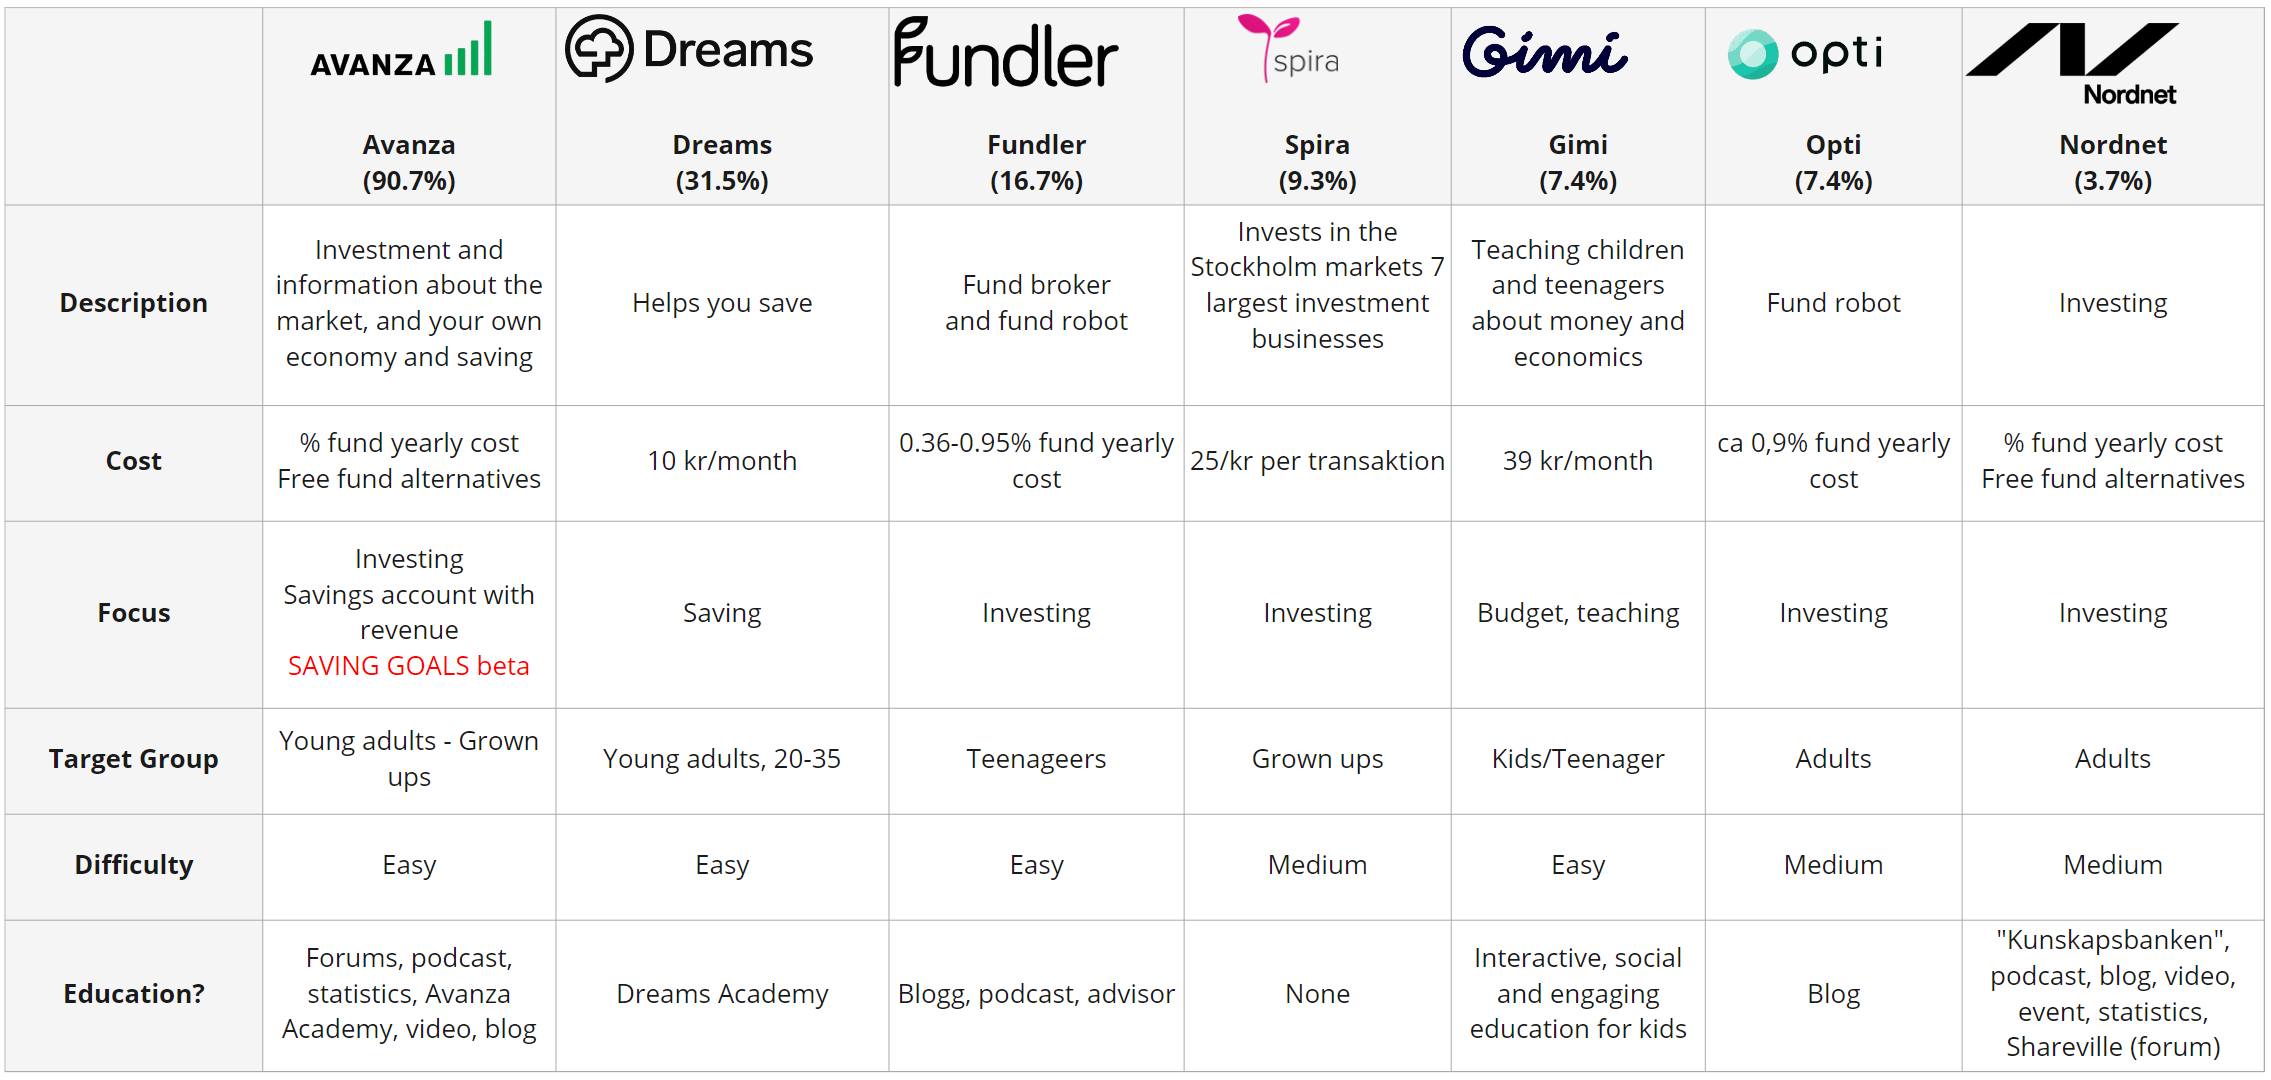 Competitor analysis table: description, cost, focus, target group, difficulty, and education.